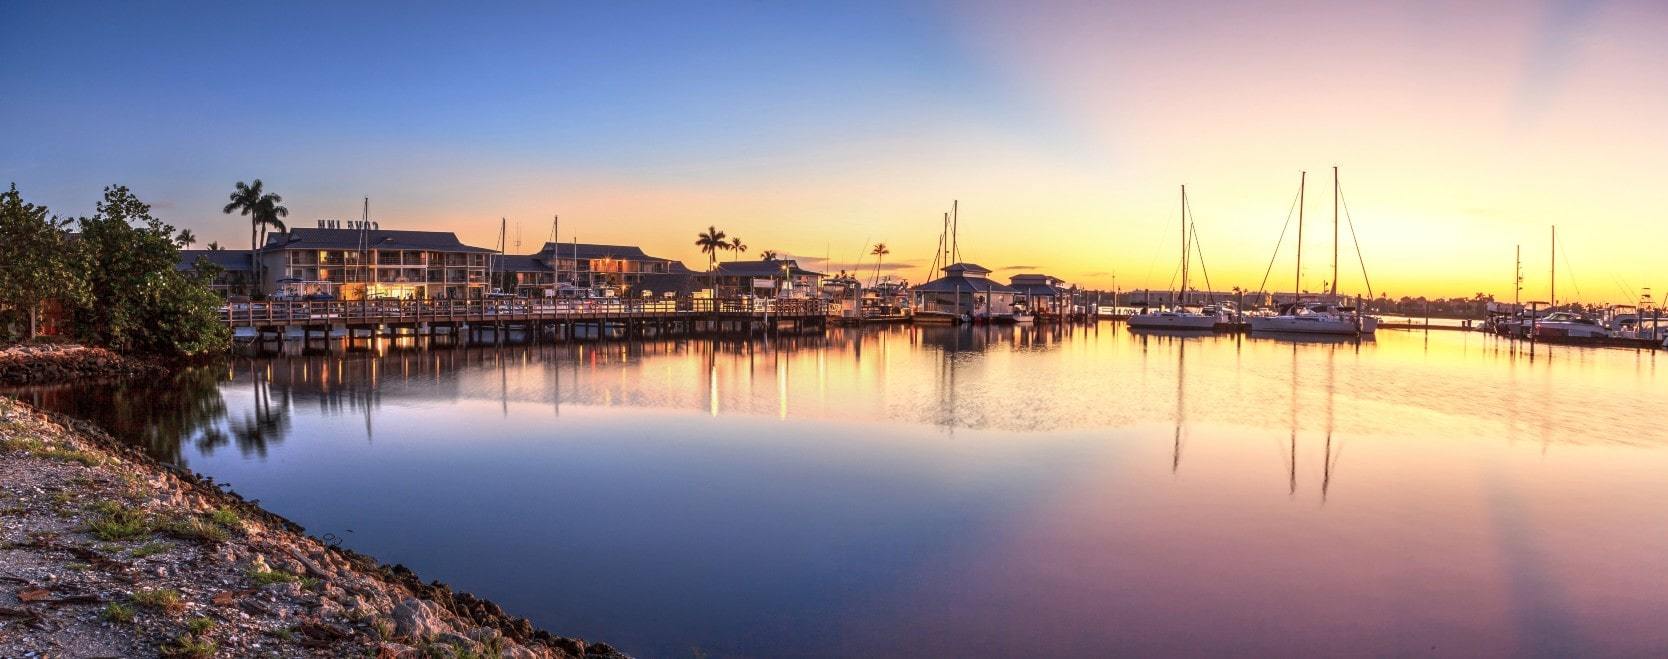 Sunrise over the water with Olde Naples waterfront homes in foreground